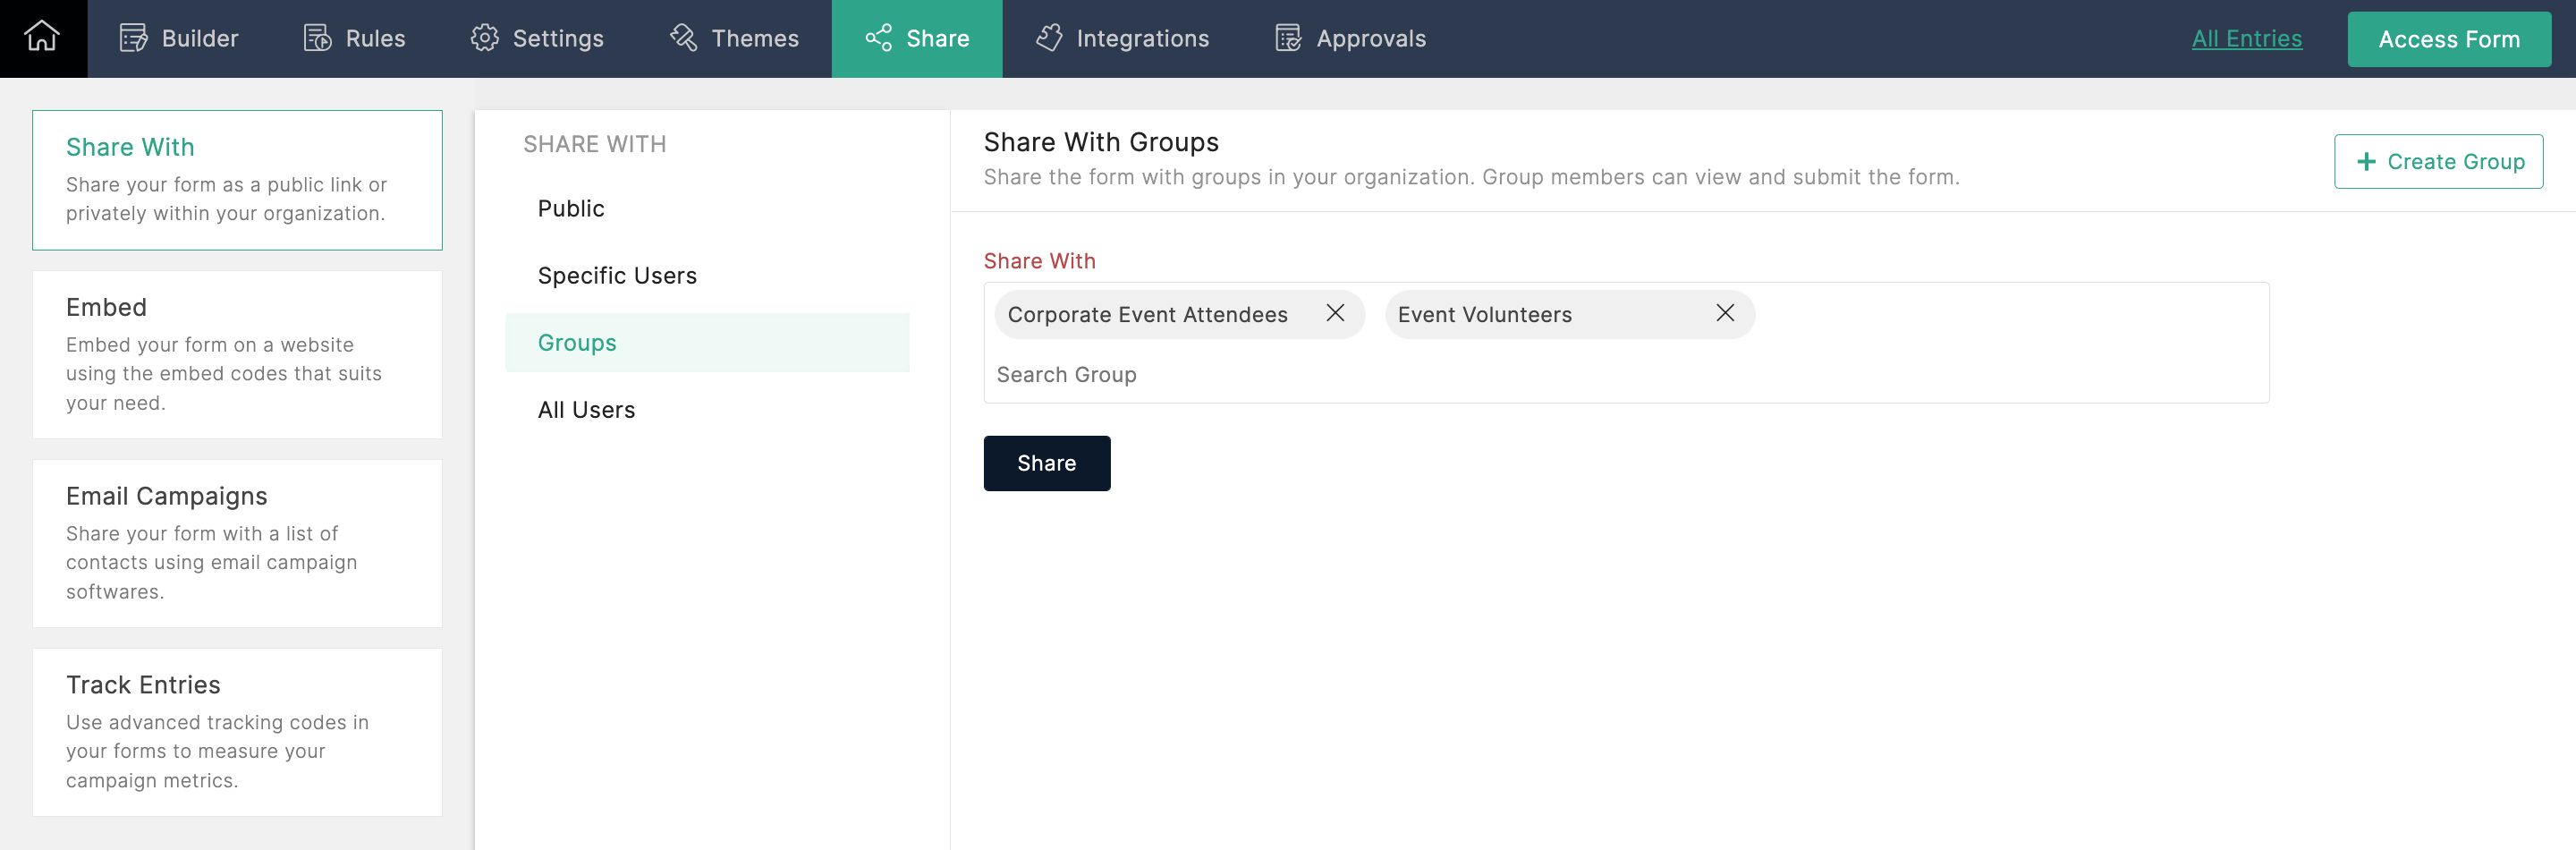 Select the groups to share the form with